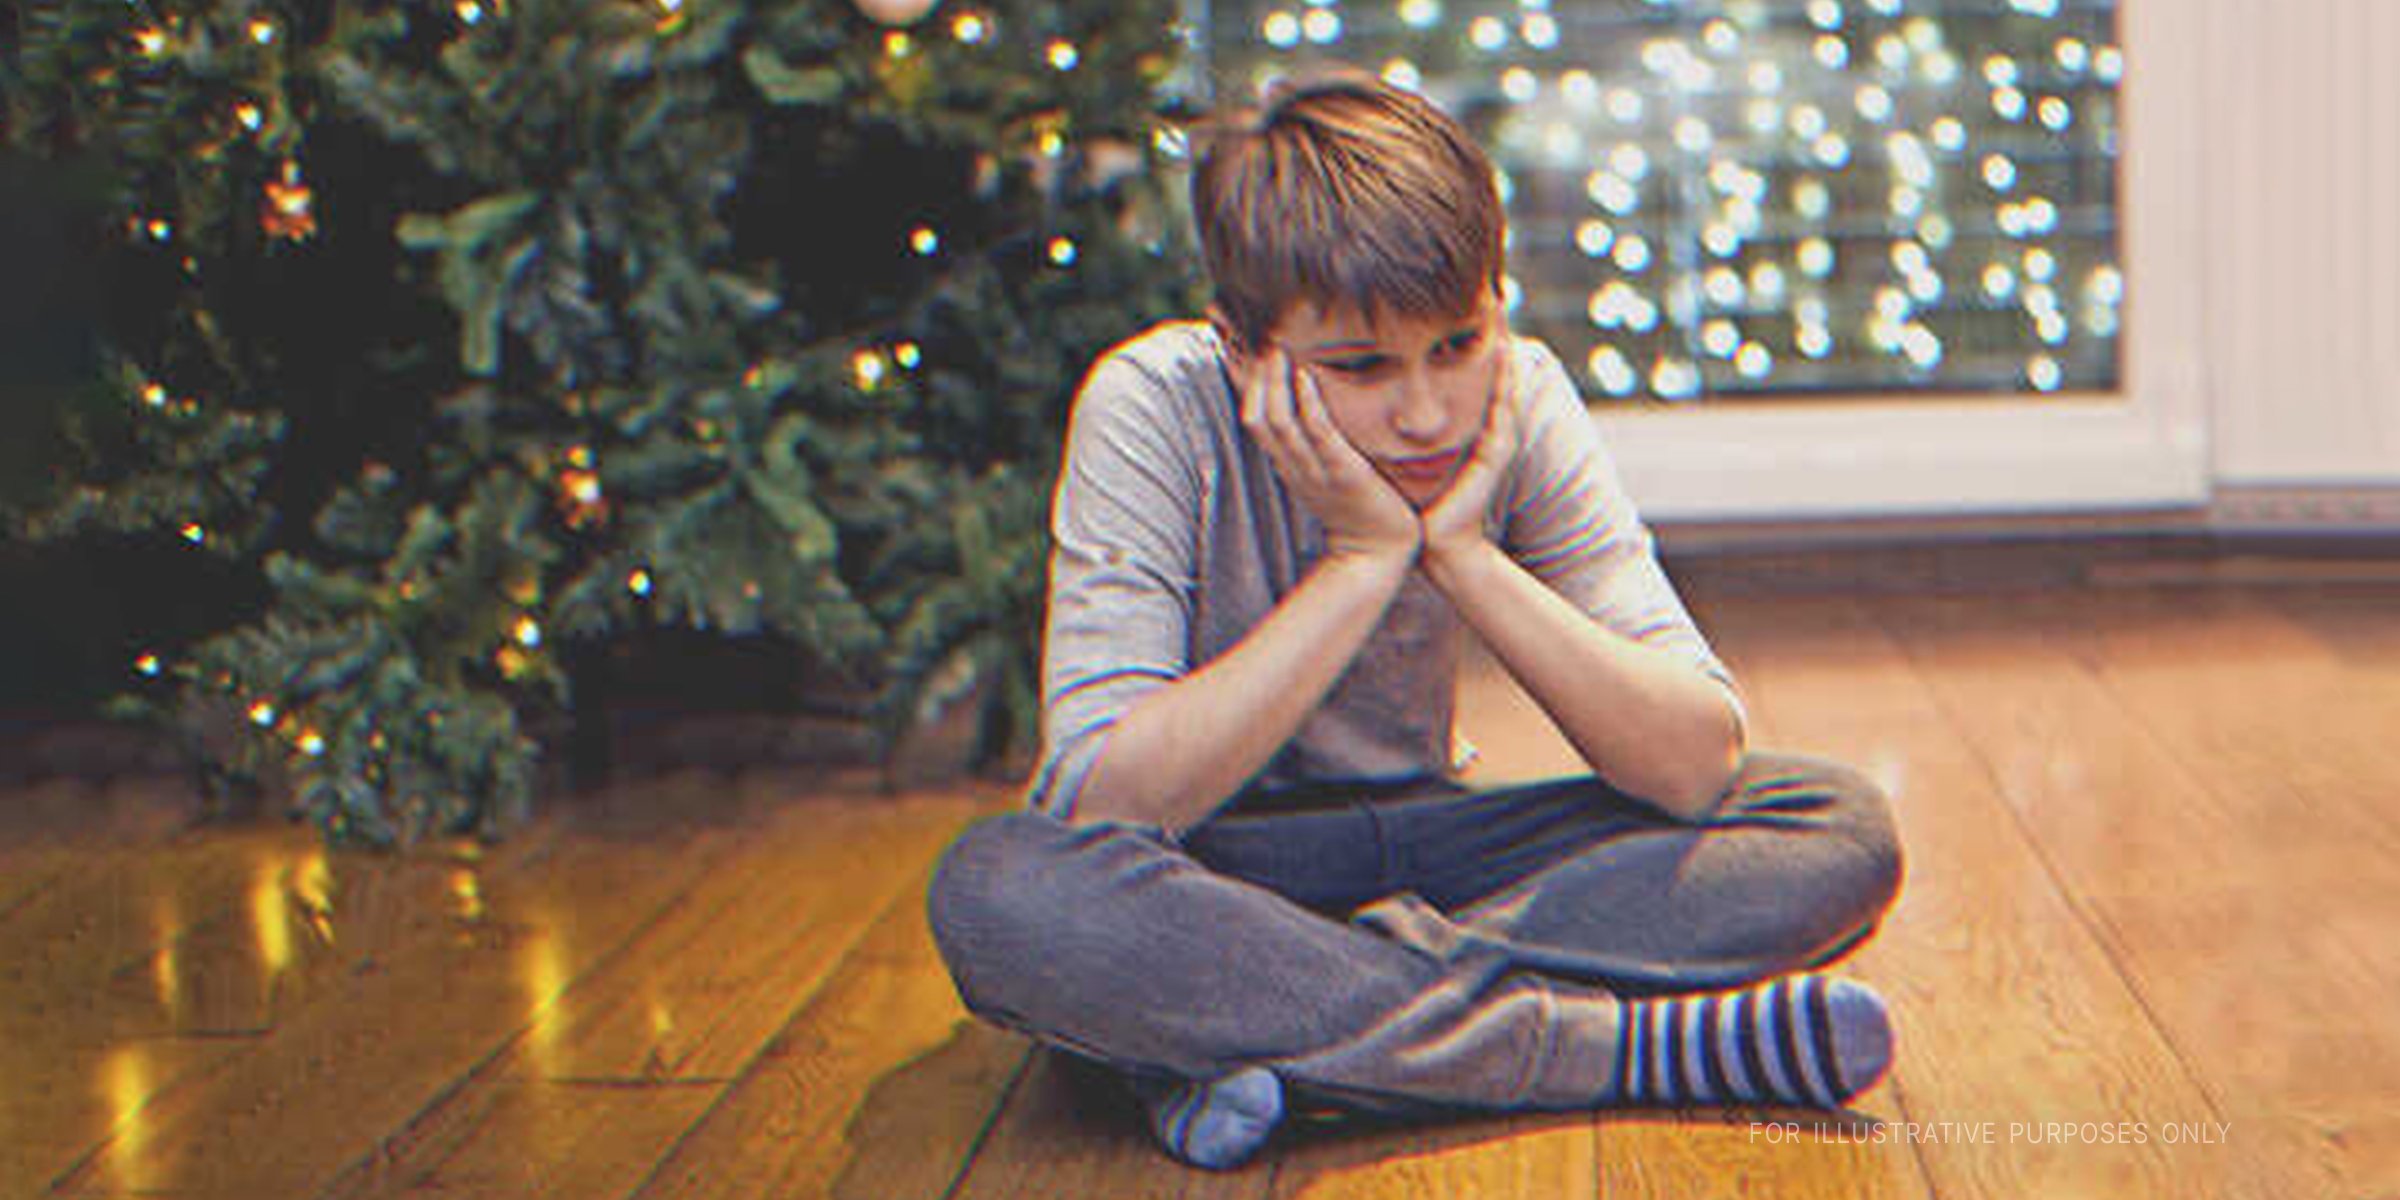 Boy sitting on the floor next to a Christmas tree. | Source: Getty Images